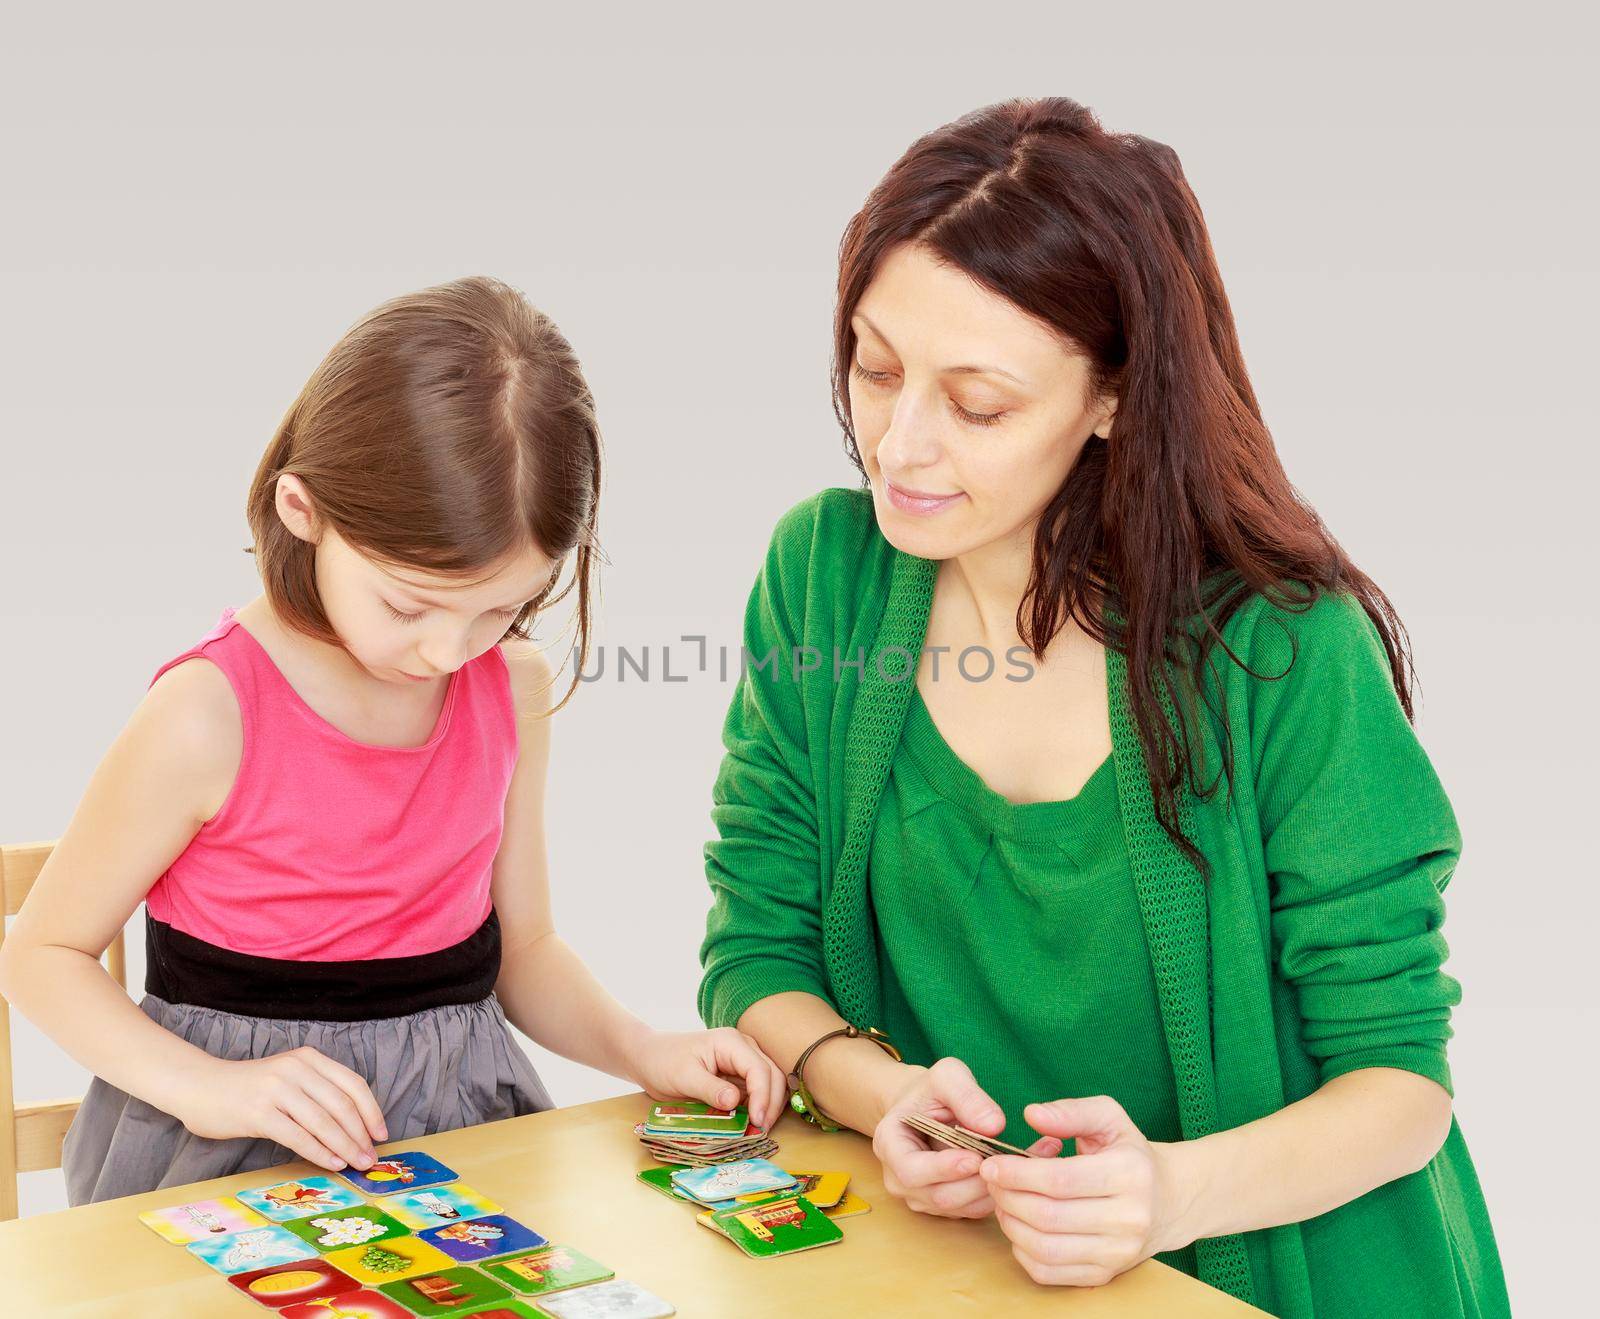 Mom and daughter at the table playing educational games by kolesnikov_studio